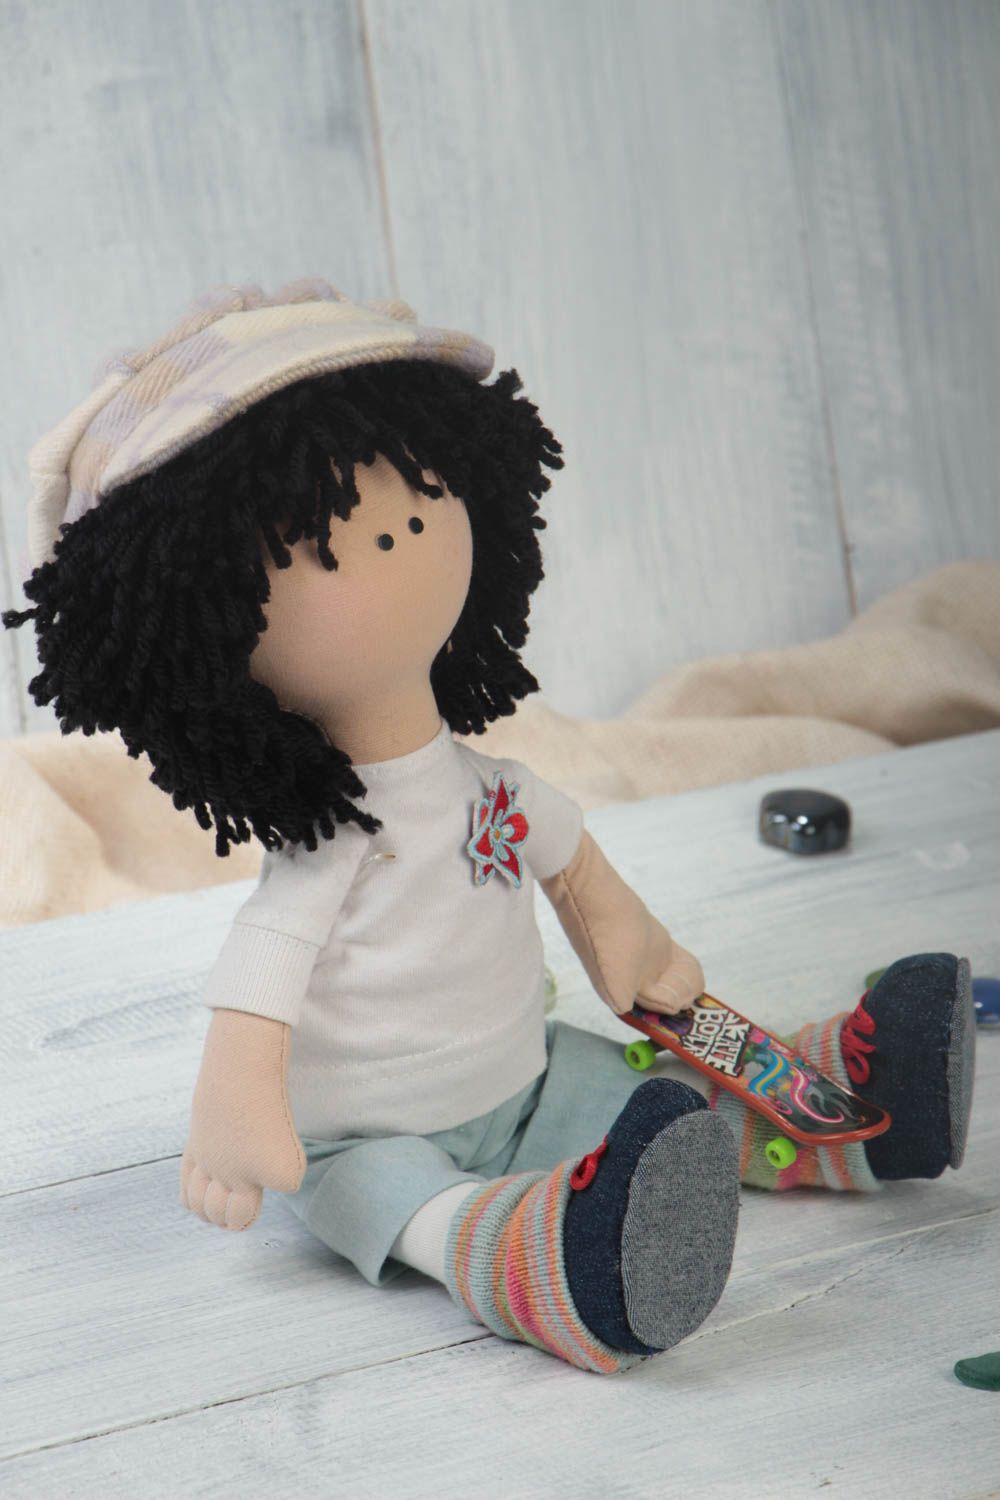 Unusual handcrafted rag doll childrens toy interior decorating gift ideas photo 1